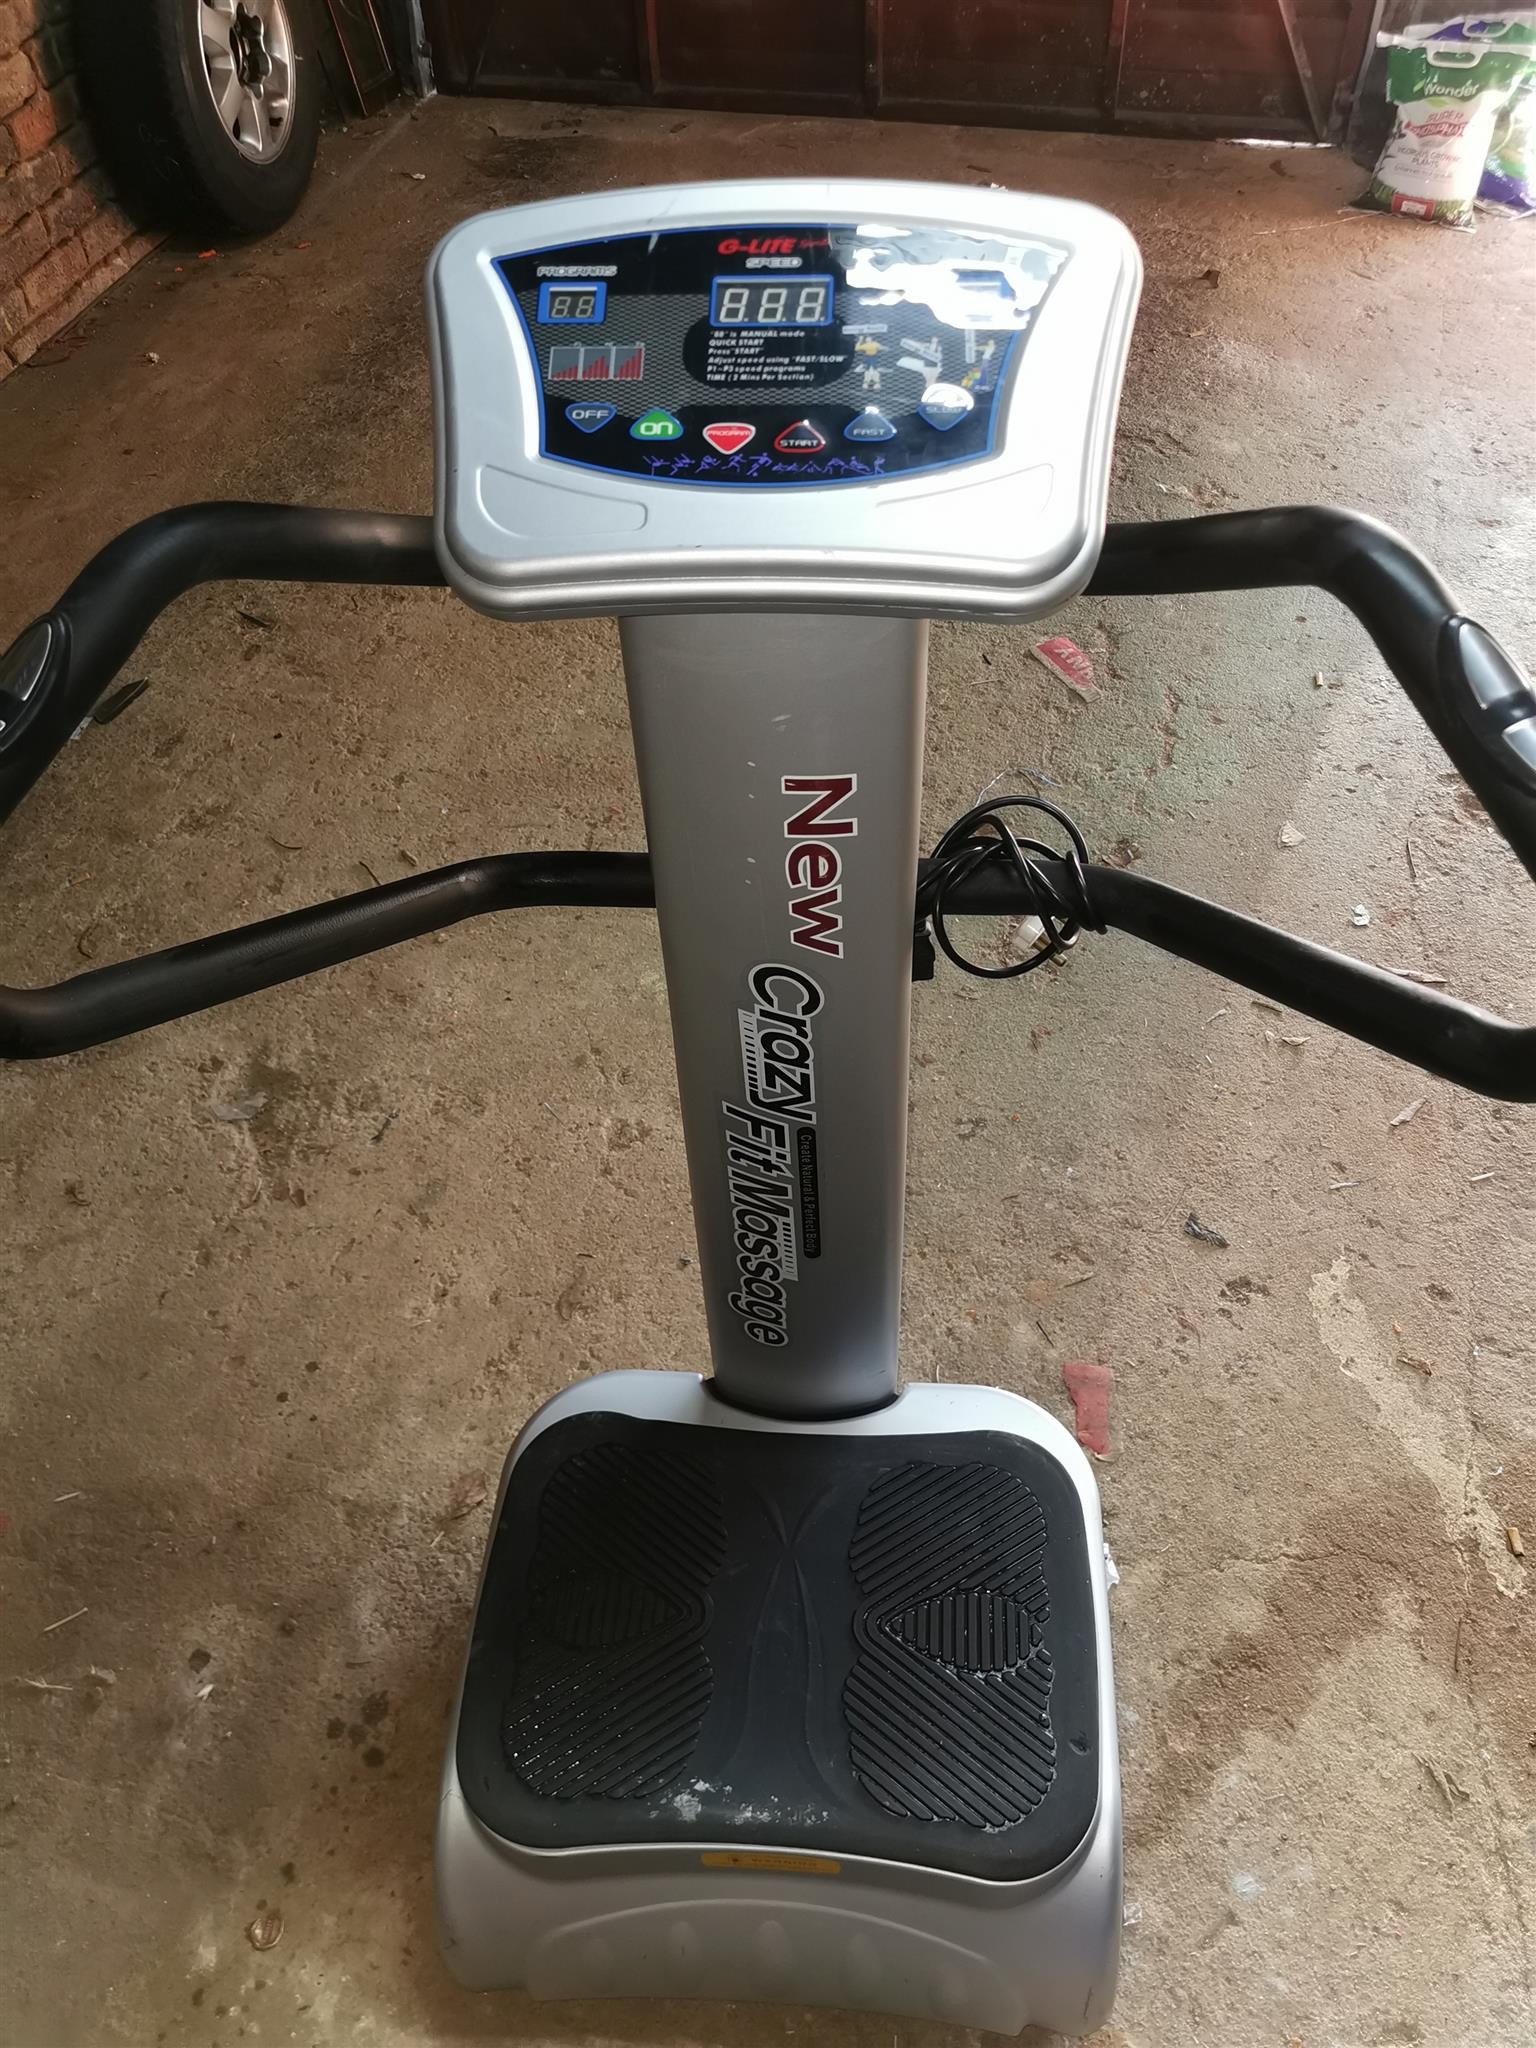 MUST GO!!! Crazy fit massage machine for sale in GREAT condition everything work